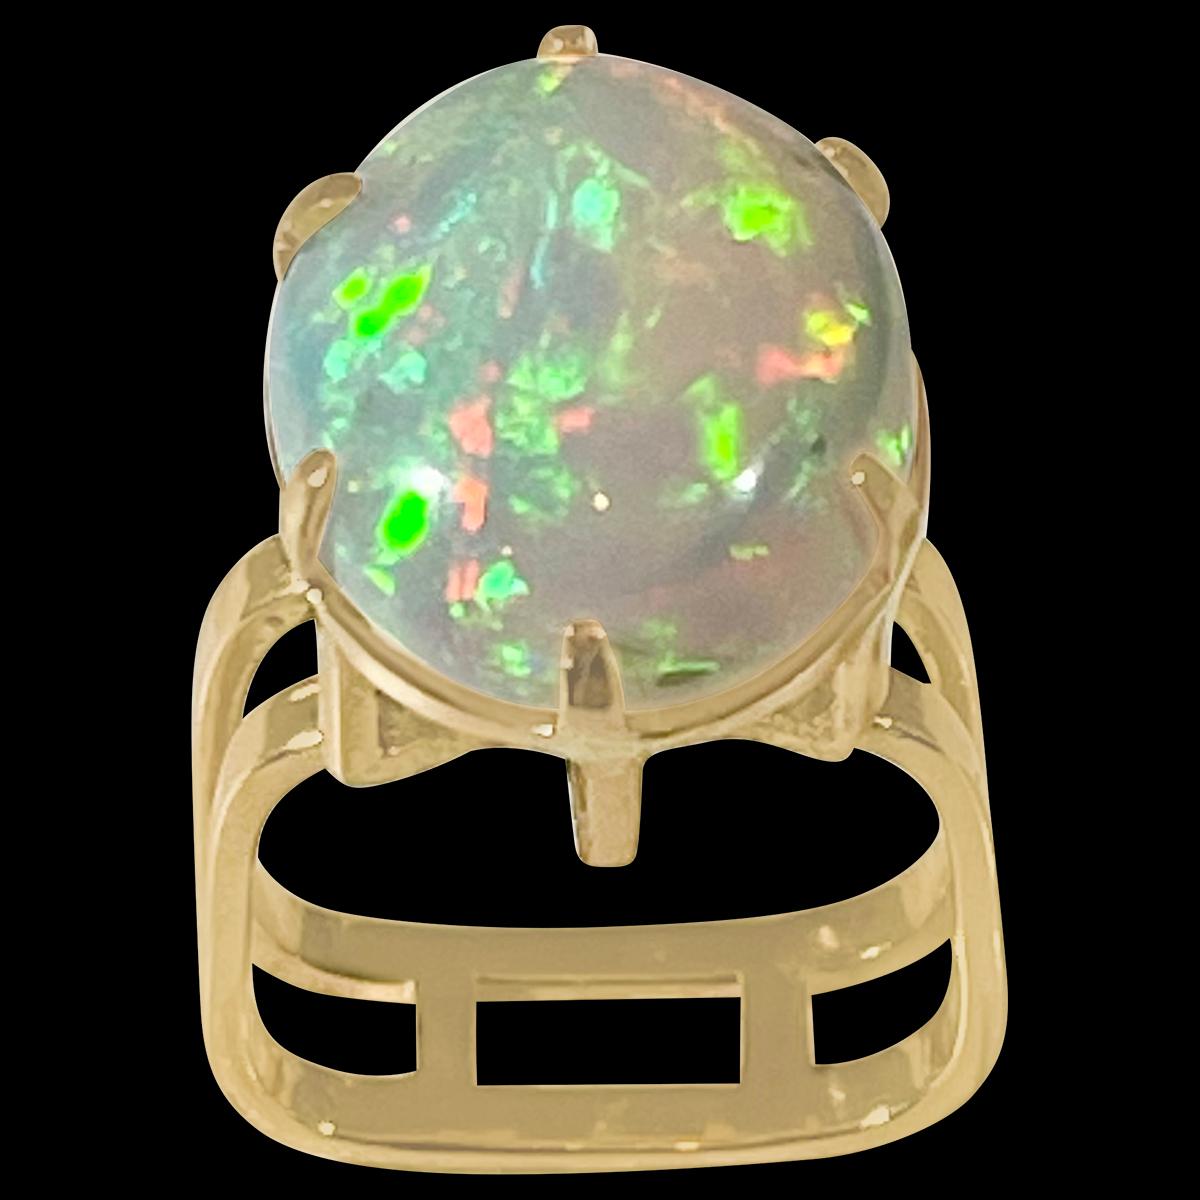 approximately 12 Carat Oval Shape Ethiopian Opal Cocktail Ring 14 Karat Yellow Gold size 6.5
Oval  Natural Opal  A classic, Cocktail ring 
14 Karat Yellow Gold Estate
Size of the opal 18 X 15 MM, Approximately 12 Ct
Amazing colors in this opal and a